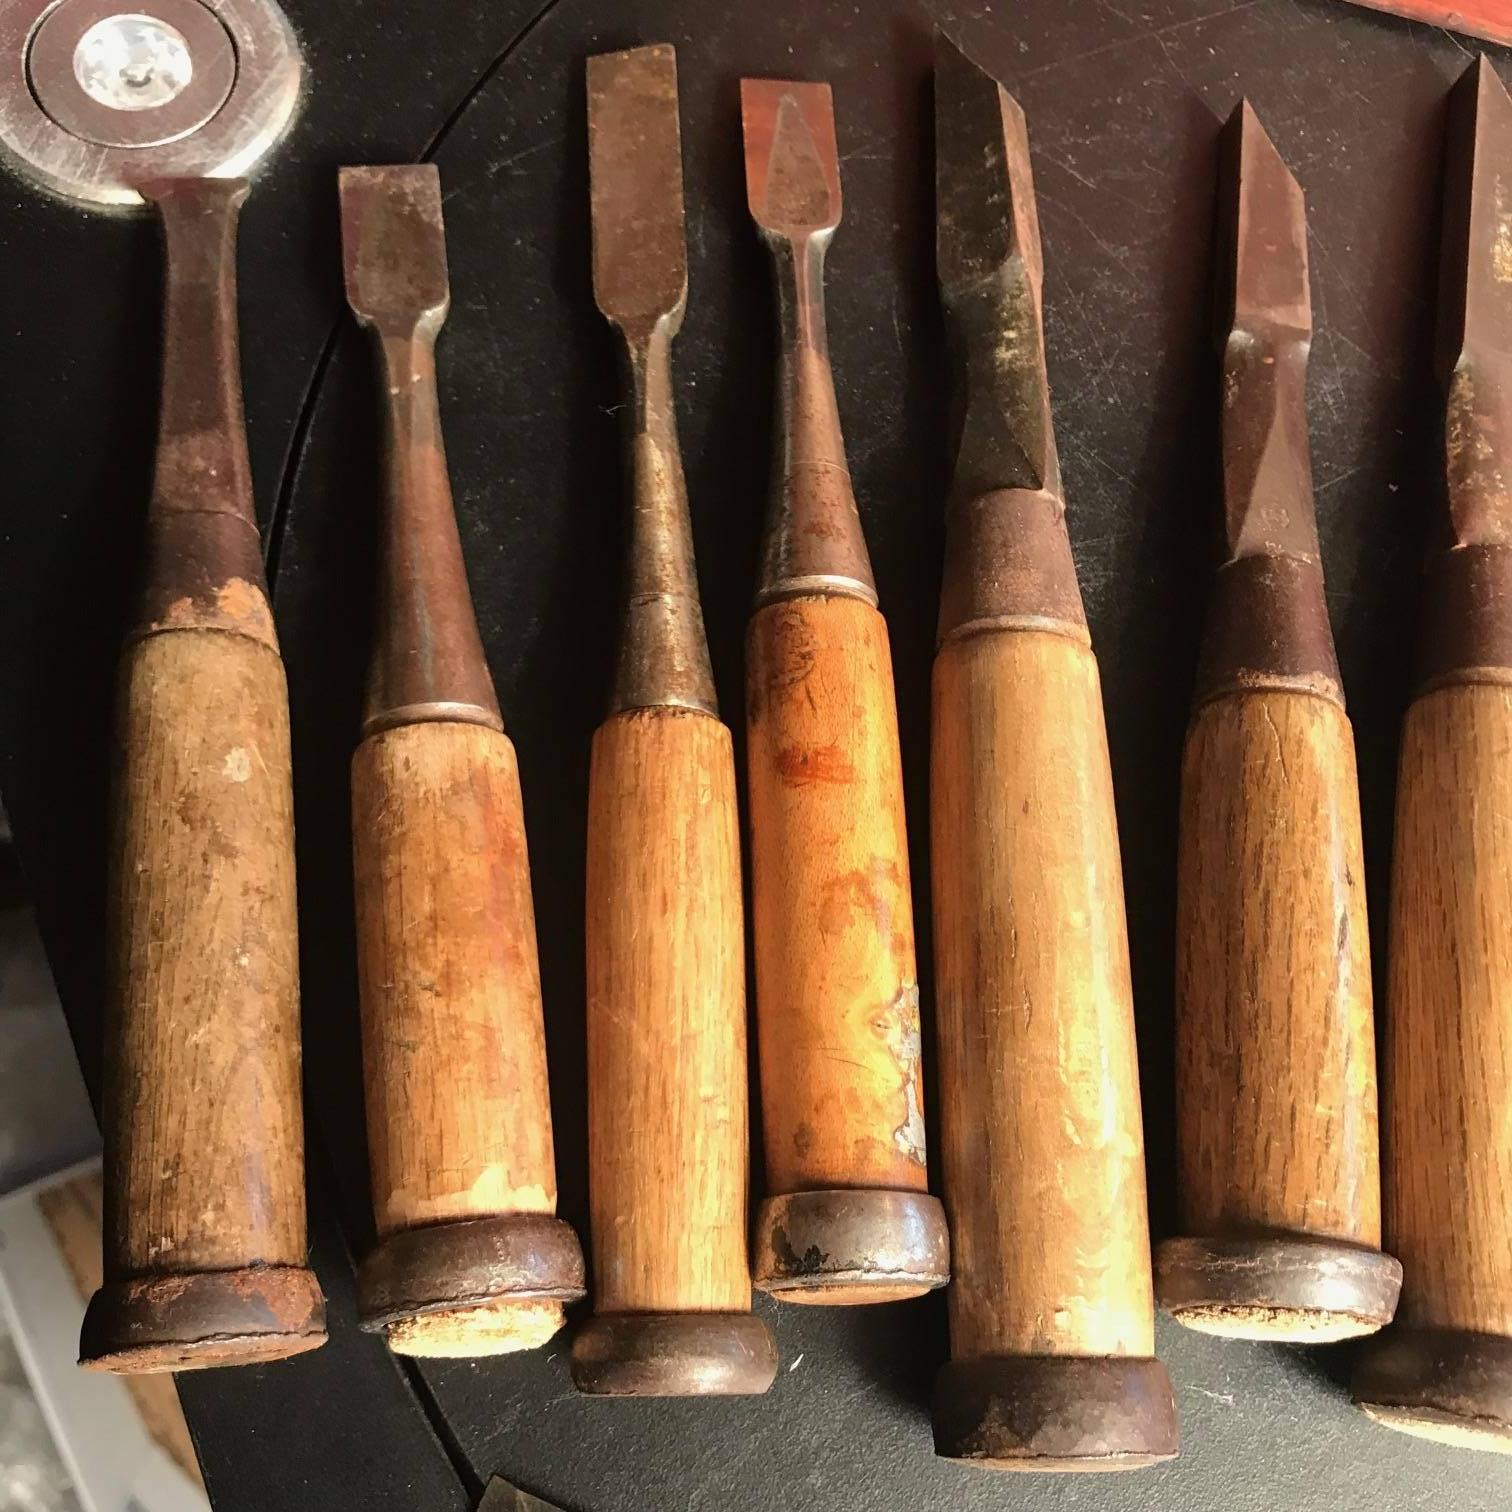 Hand-Crafted Japanese Artisan's Cache Box of 14 Professional Nomi Carpenter's Carving Tools